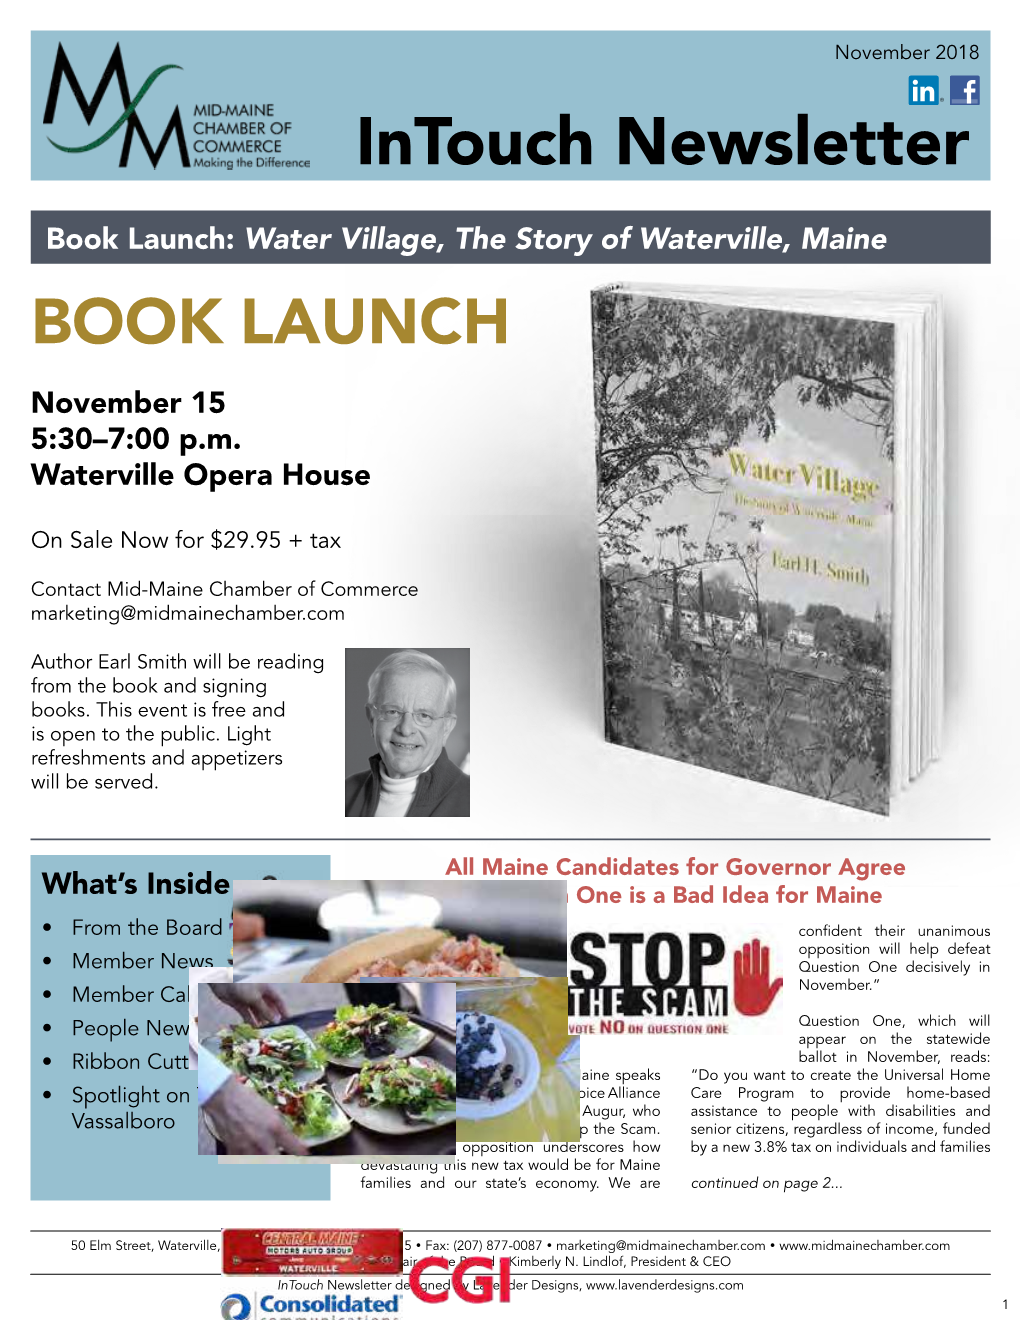 Book Launch: Water Village, the Story of Waterville, Maine BOOK LAUNCH